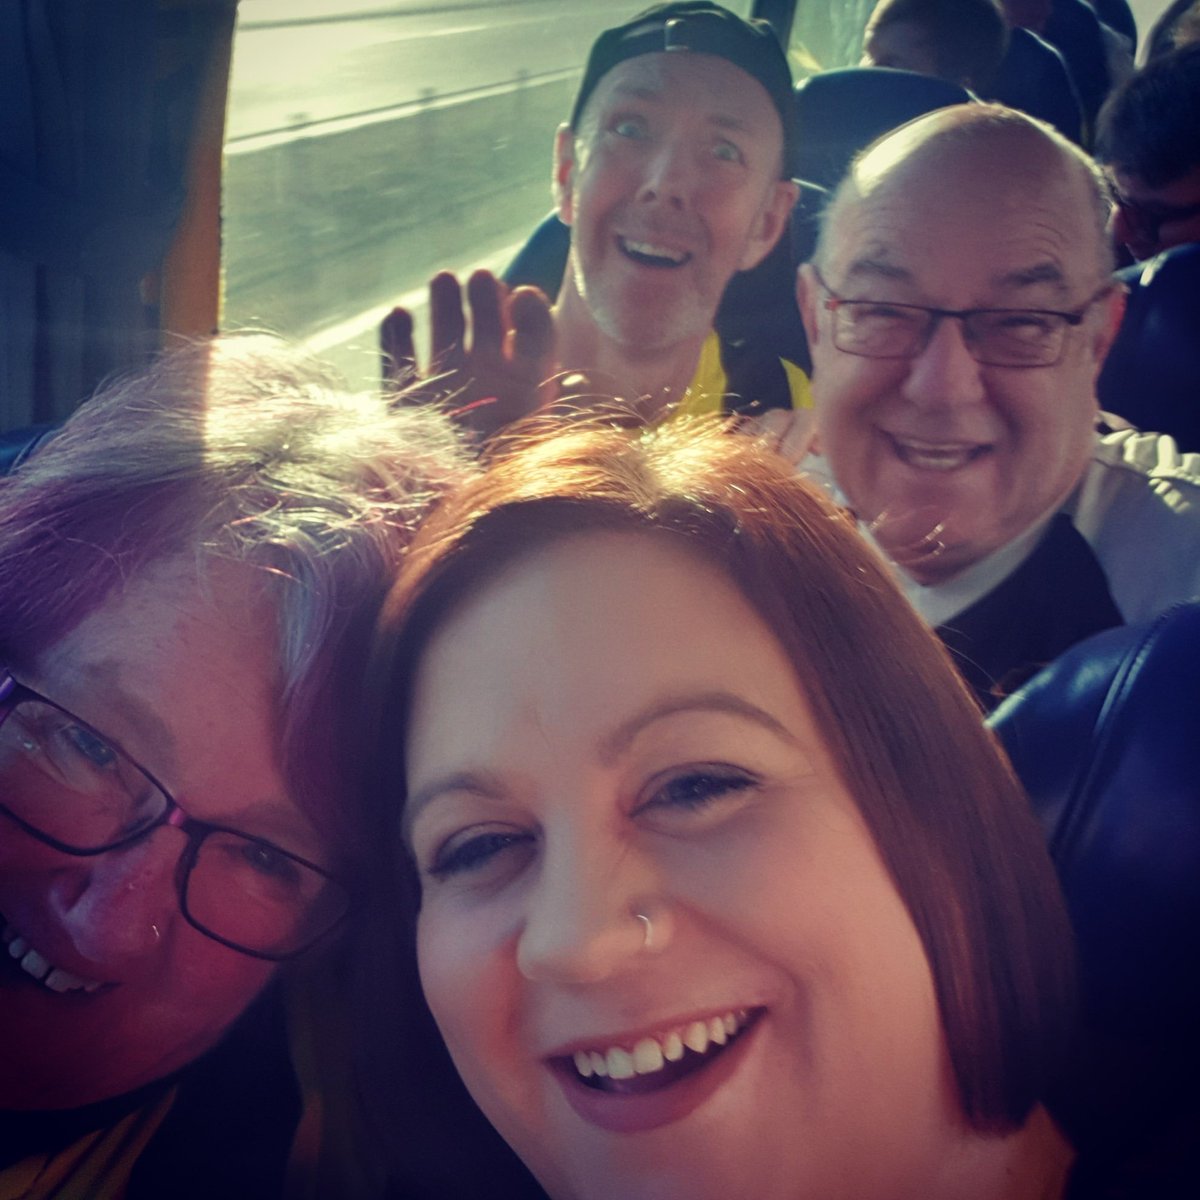 We're on our way!! On the @Dumbartonfc Supporters Bus to Aberdeen 🖤💛⚽️💛🖤 #SonsFamily #BlackAndGoldLoyal #SupportOurSons #SonsOnTour